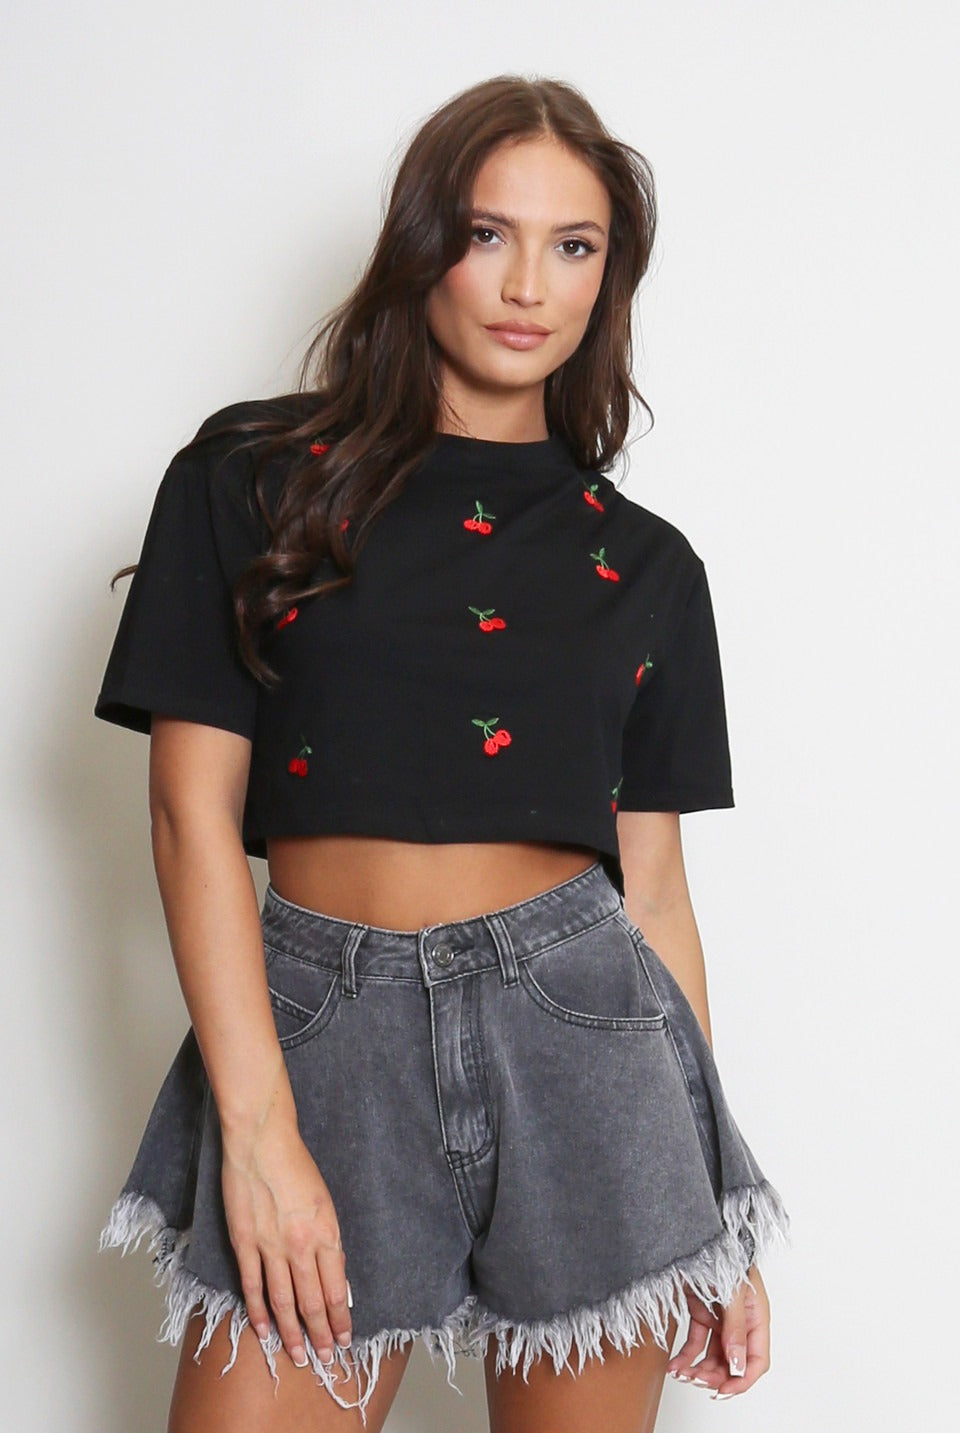 Black Cherry Embroidered Cropped T-Shirt - June - Storm Desire